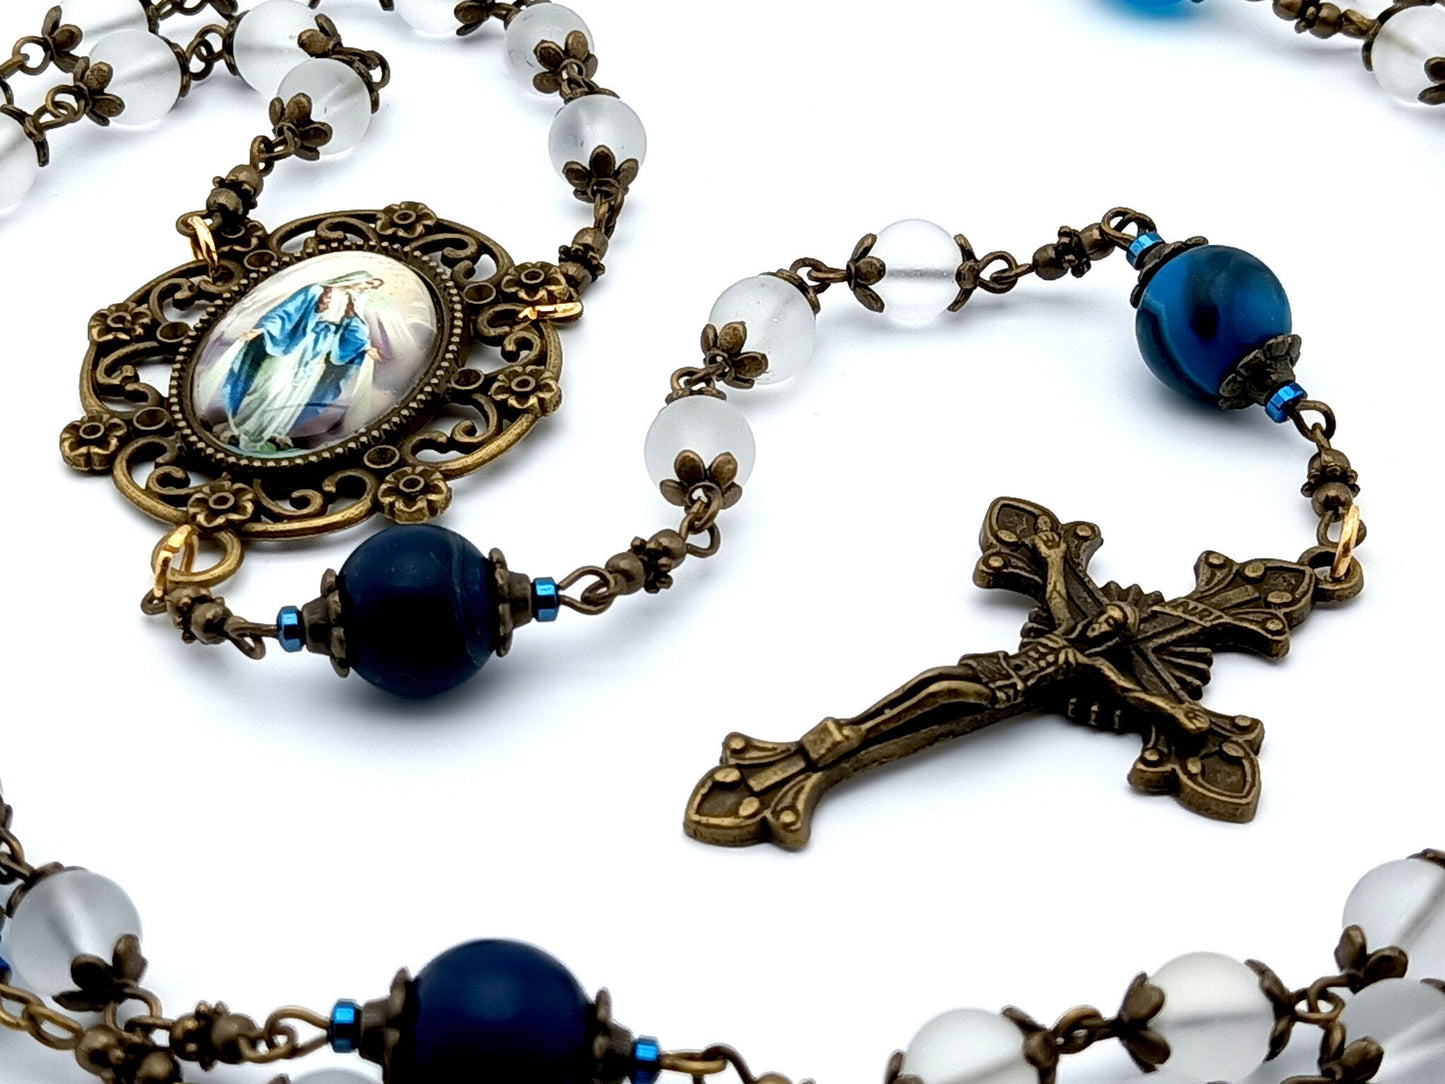 Our Lady of Grace unique rosary beads with frosted glass and blue agate gemstone beads, bronze crucifix and picture centre medal.